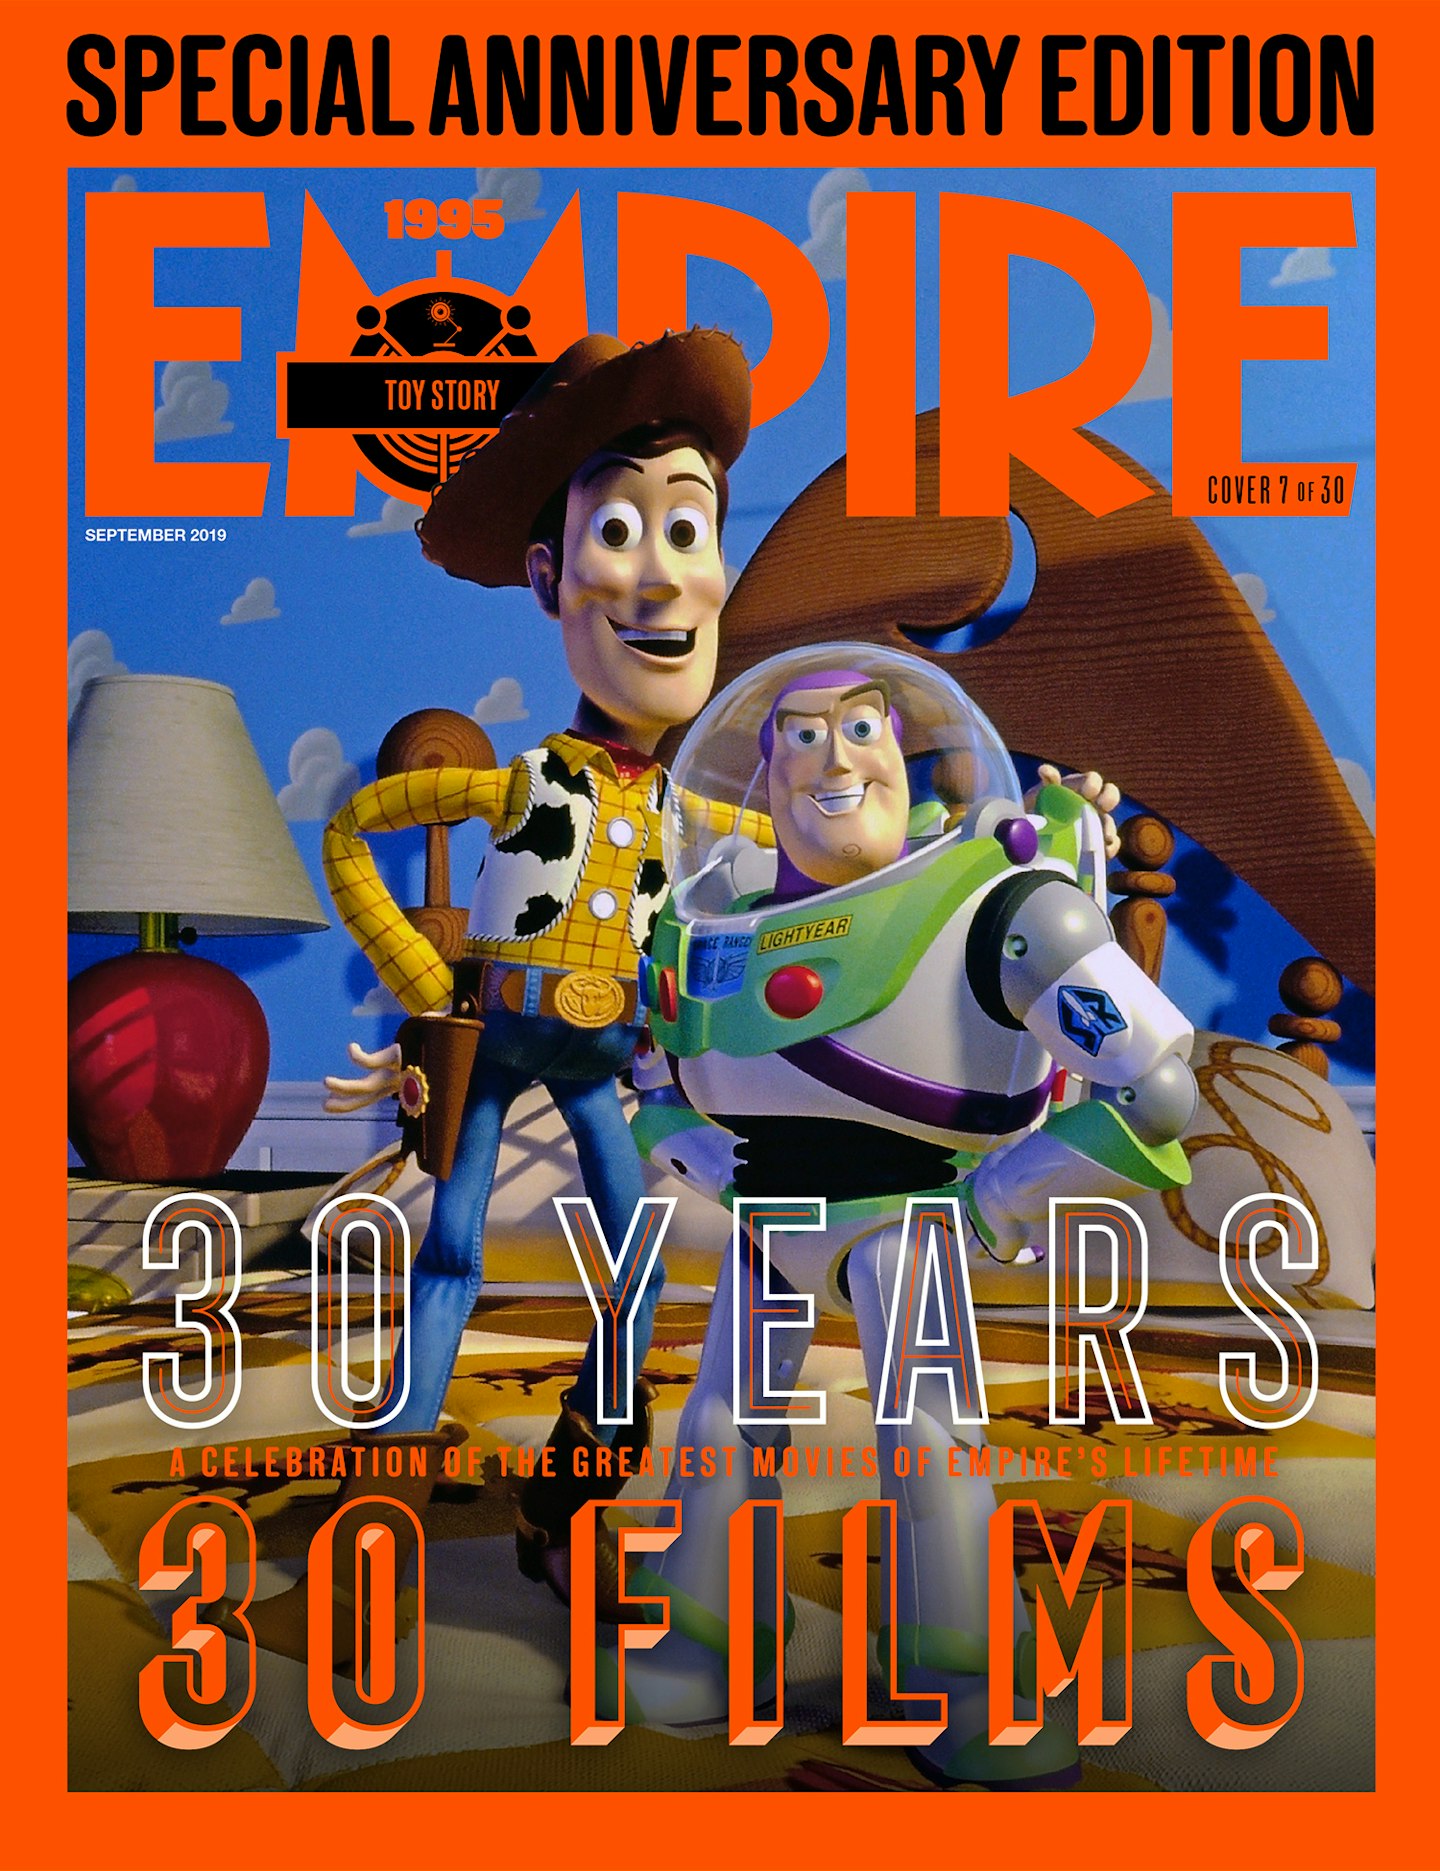 Empire's 30th Anniversary Edition Covers – Toy Story